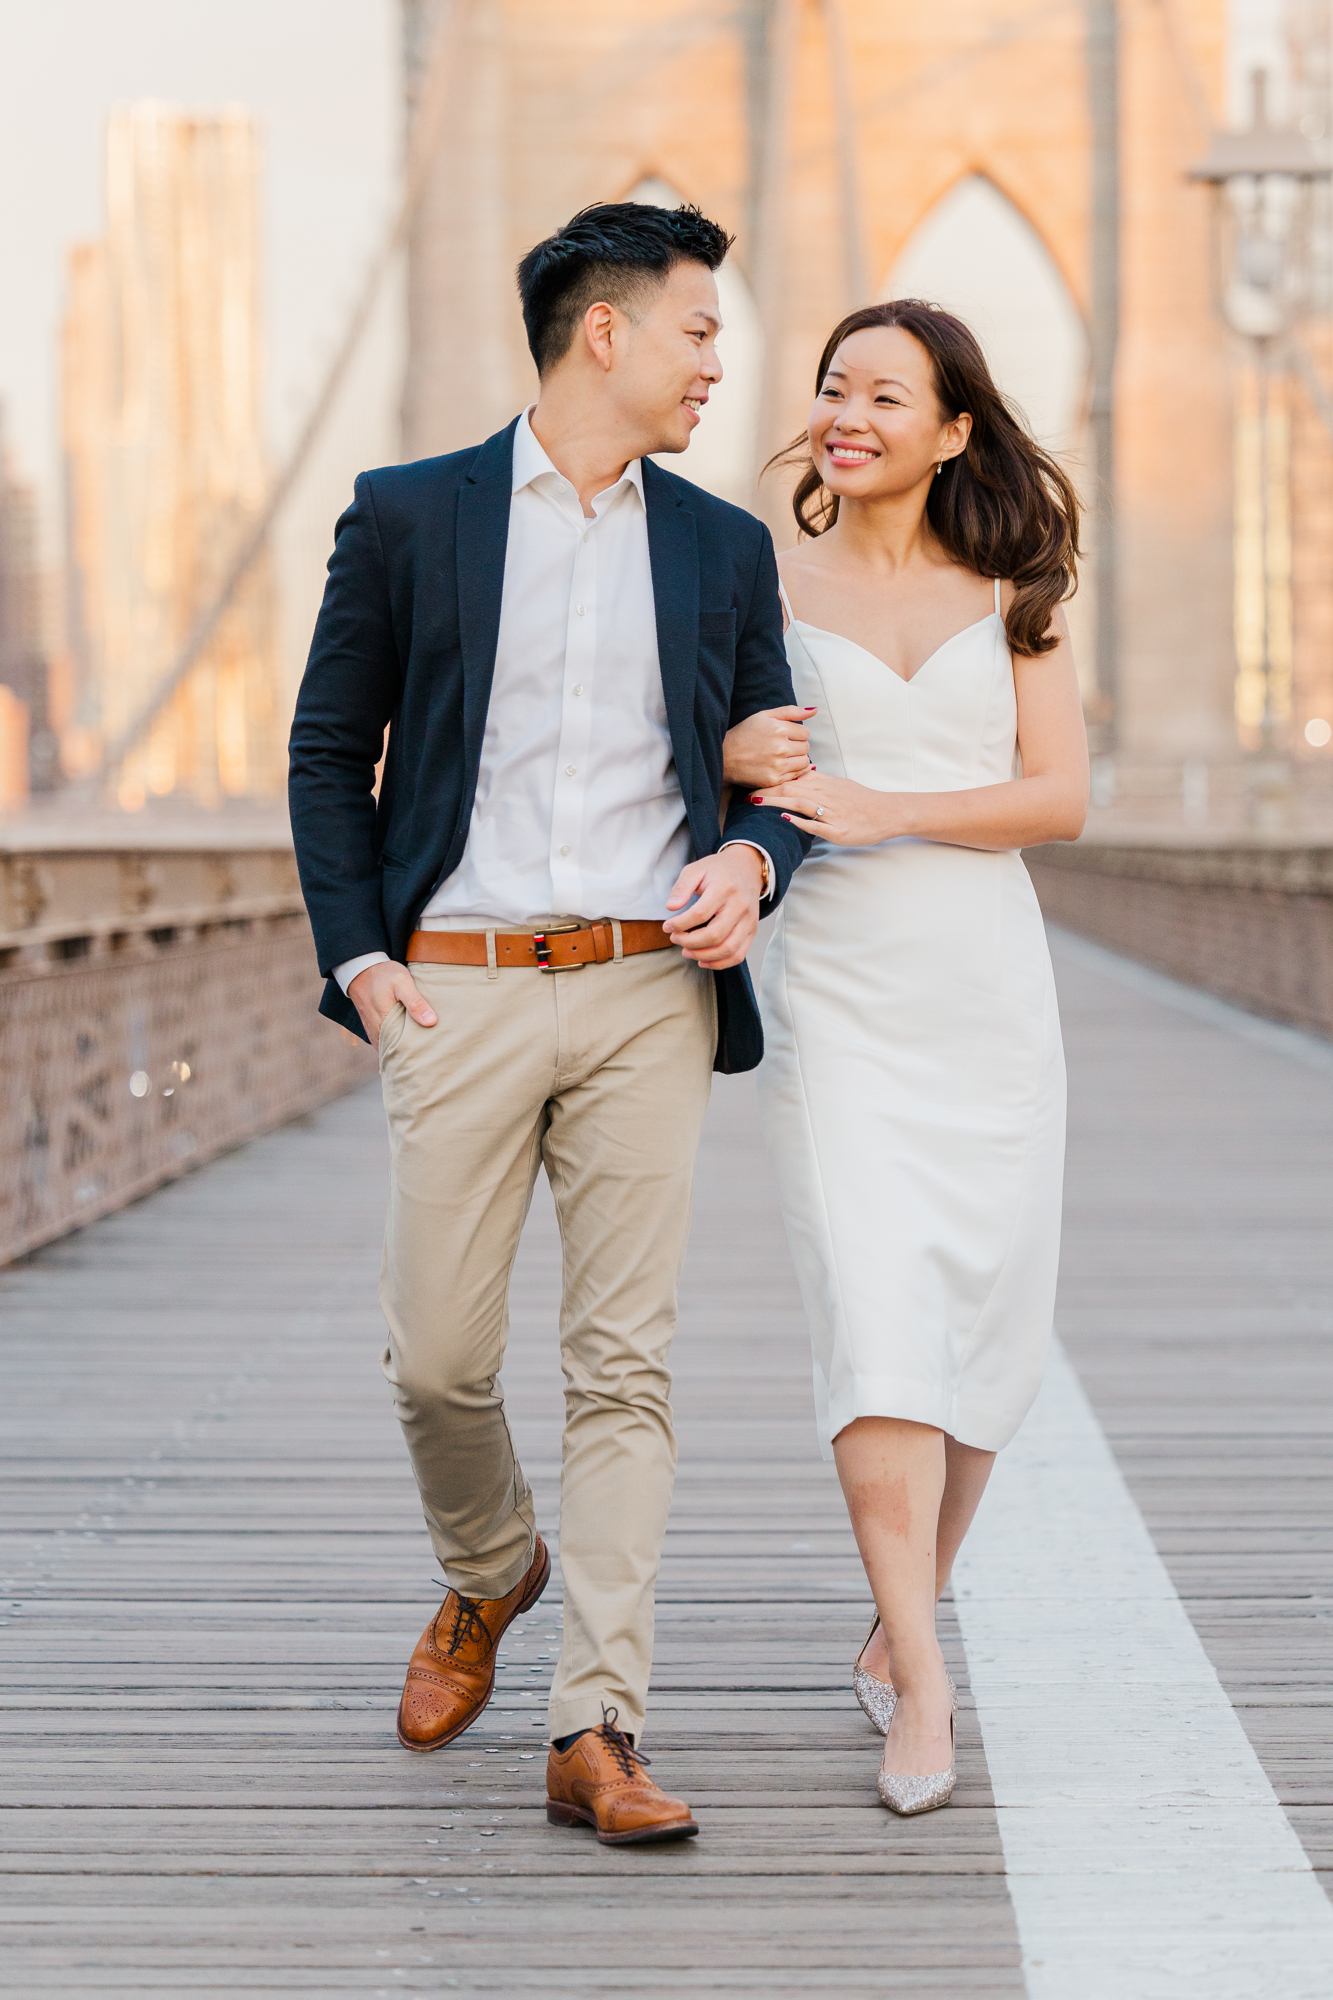 The Best Time of Year for Awesome DUMBO Engagement Photos